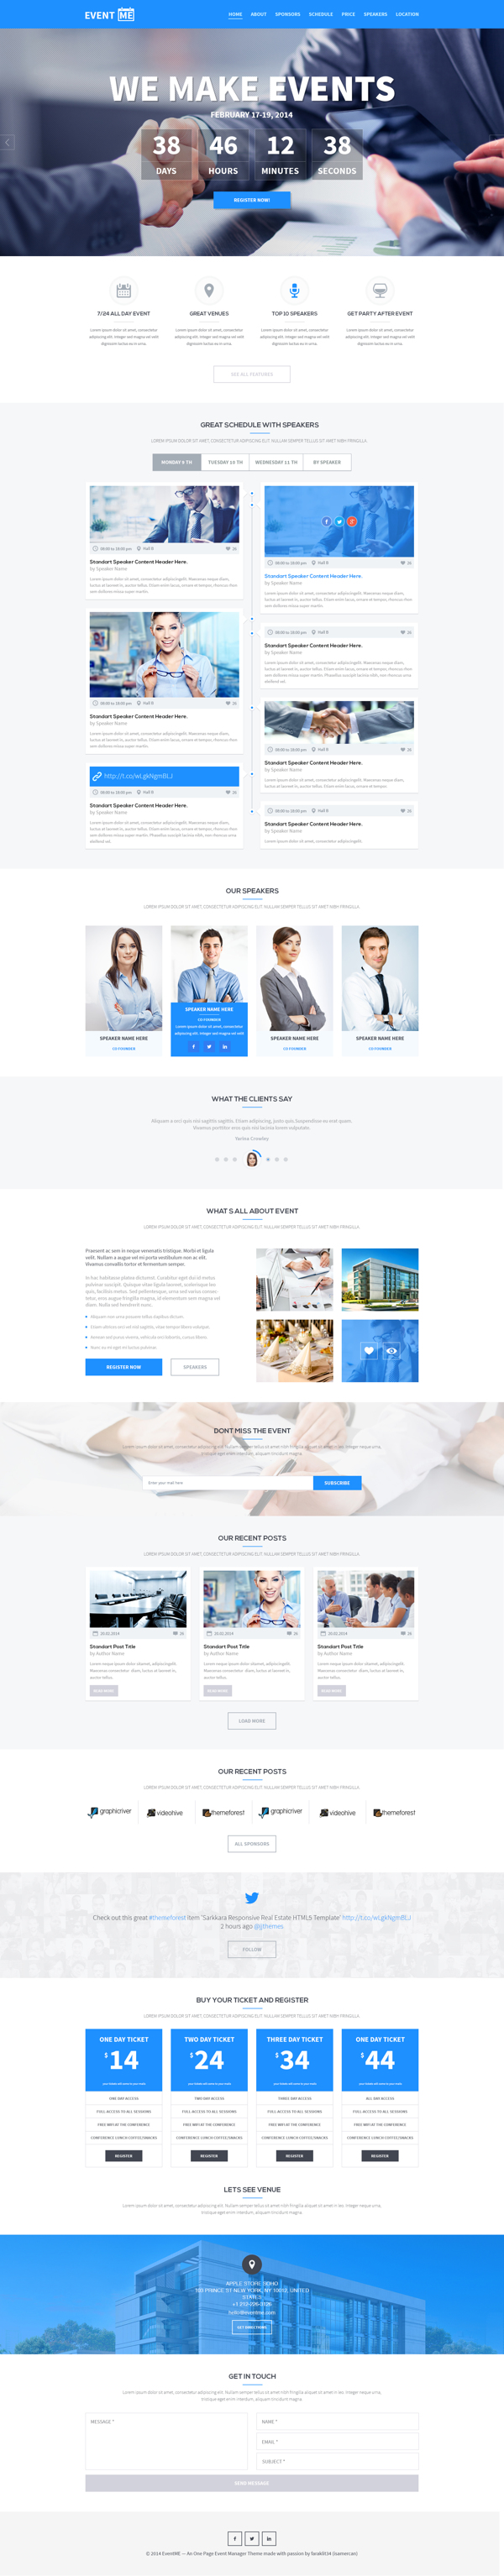 EventME - One Page Event Manager PSD Theme